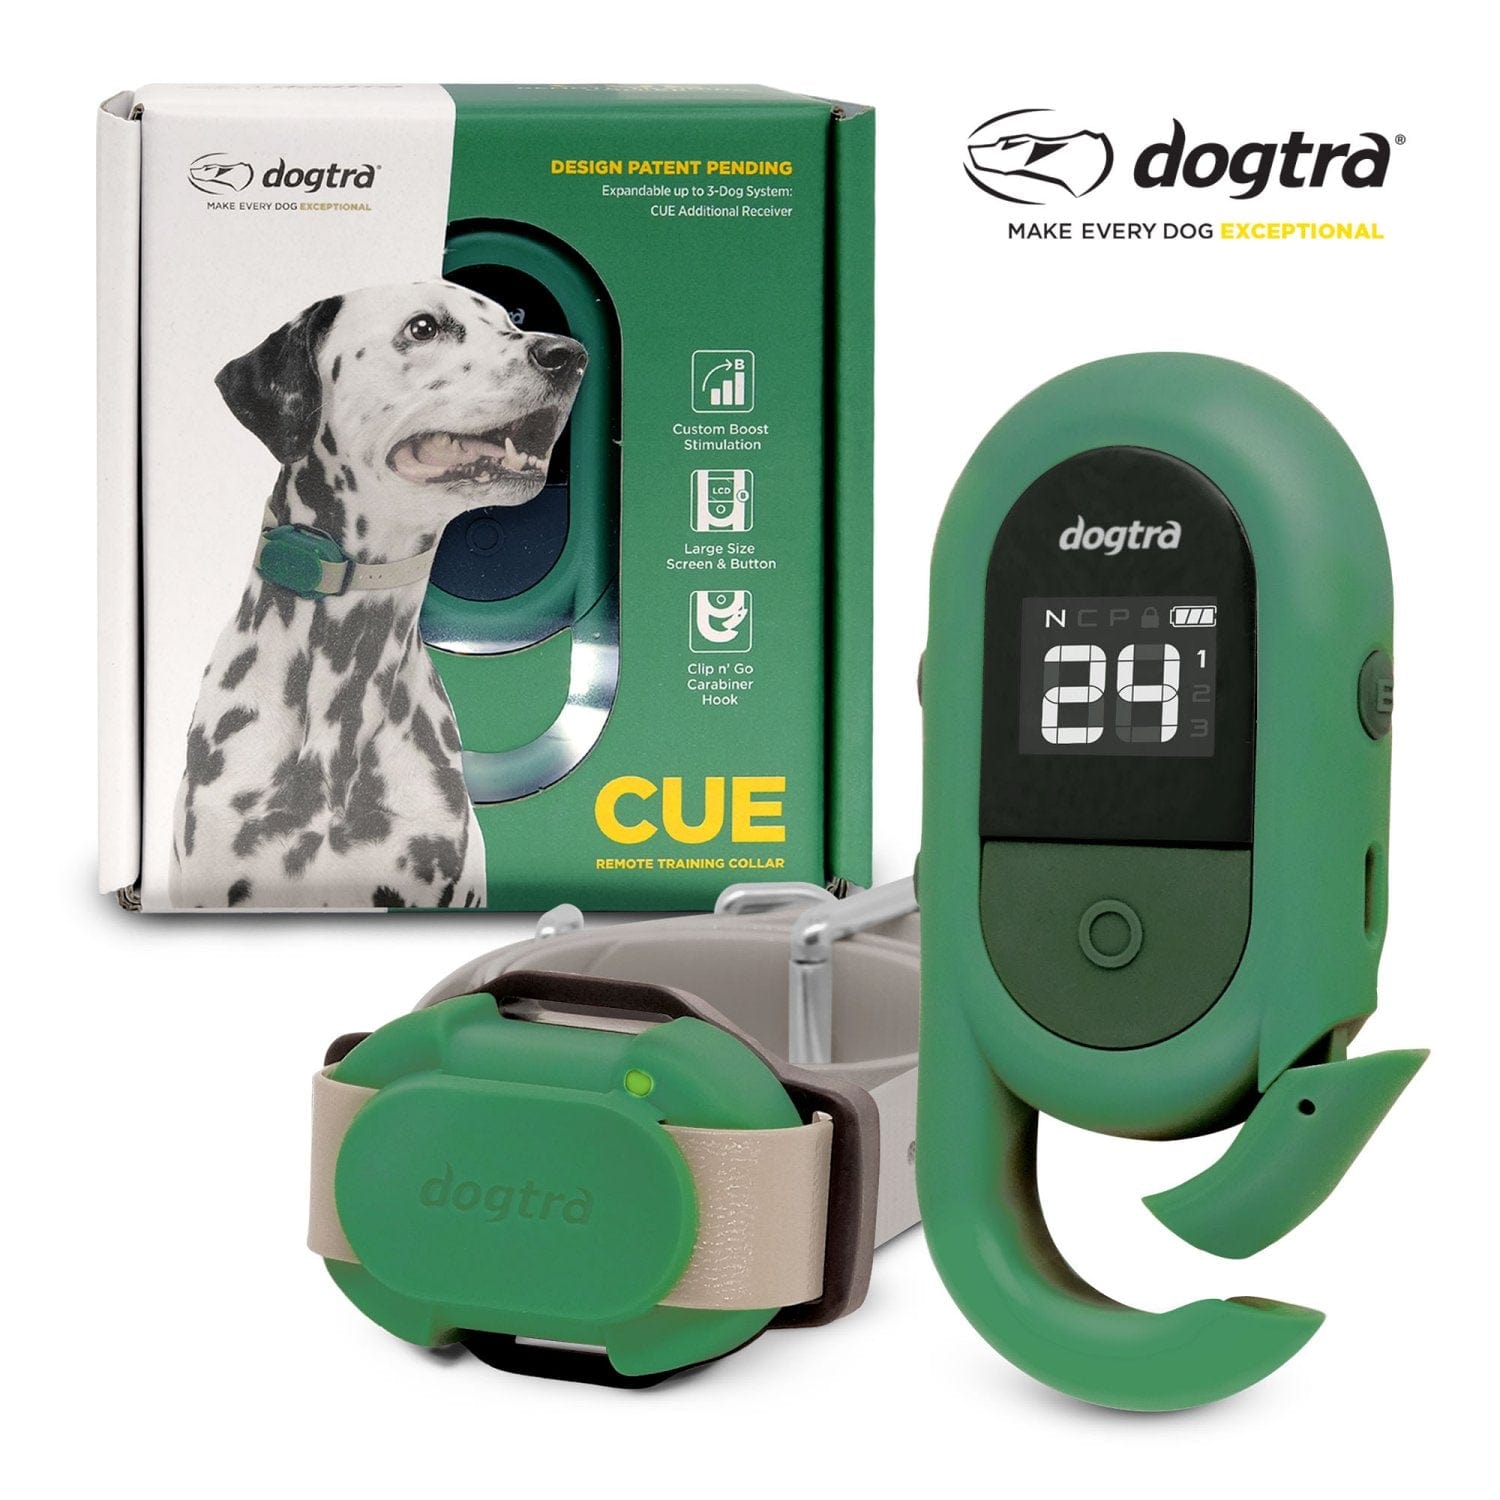 CUE GREEN Dog Training Collar by Dogtra